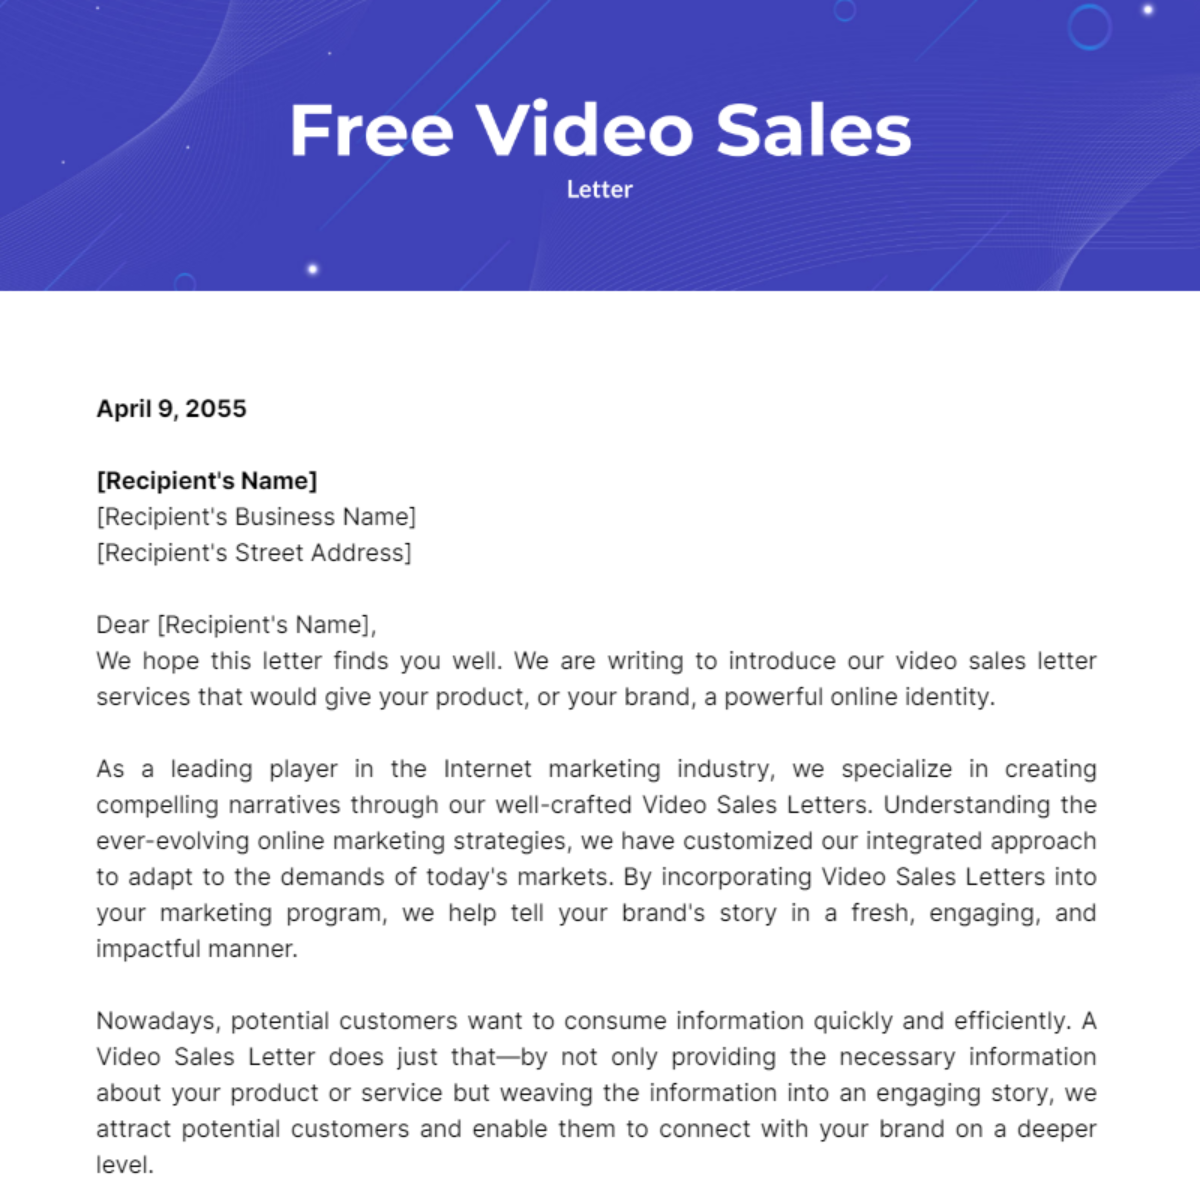 Video Sales Letter Template